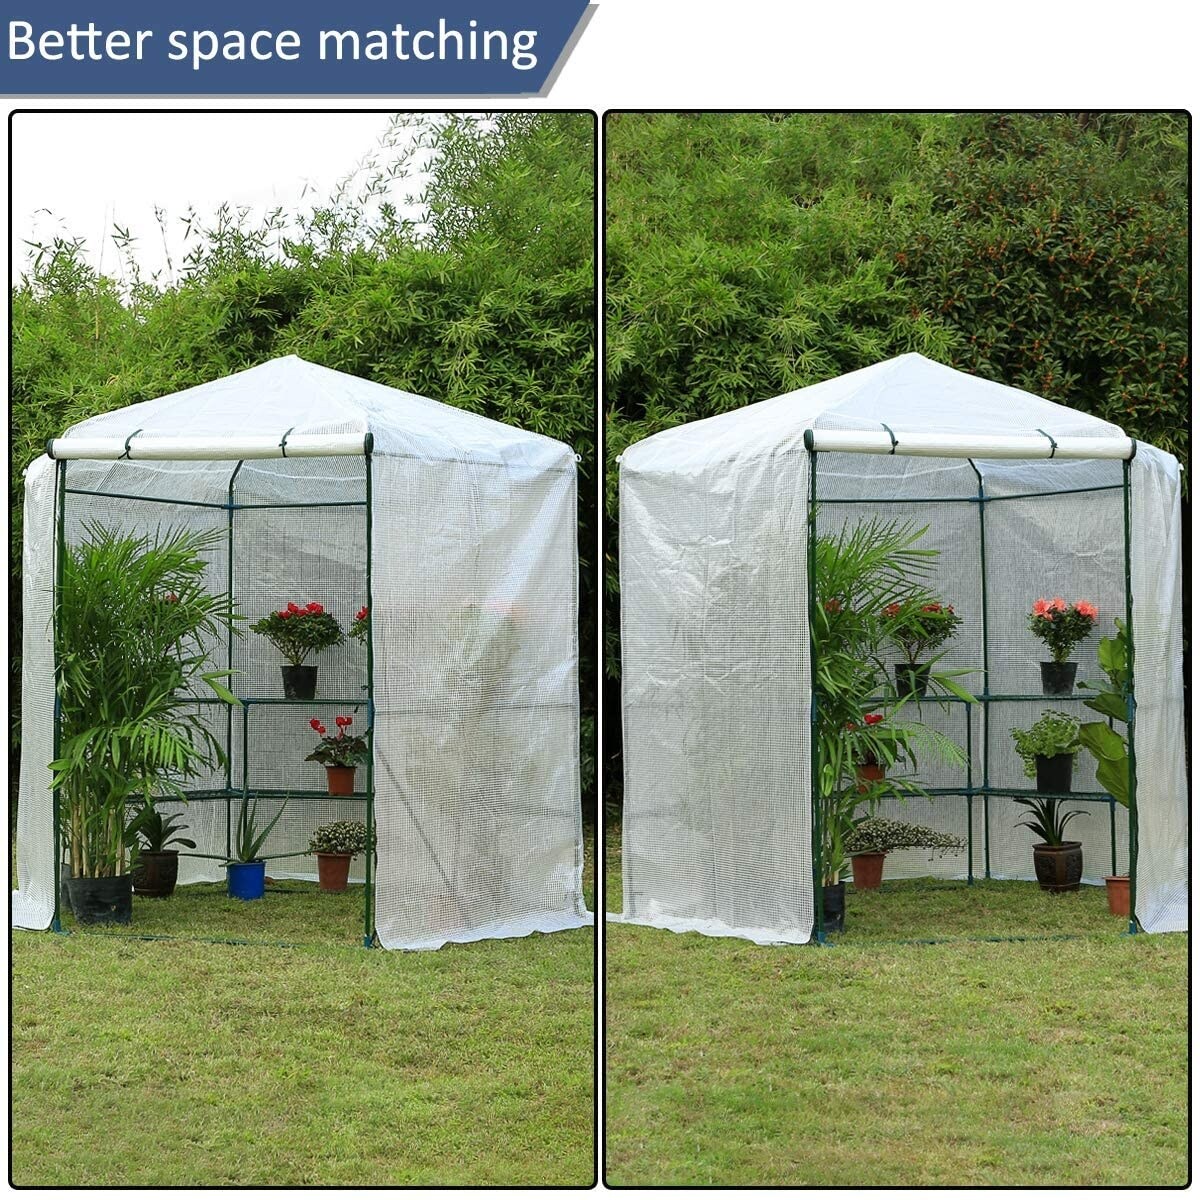 3'W x 3'D x 3'H Mini Walk-In Greenhouse Fully Enclosed Portable Greenhouse 